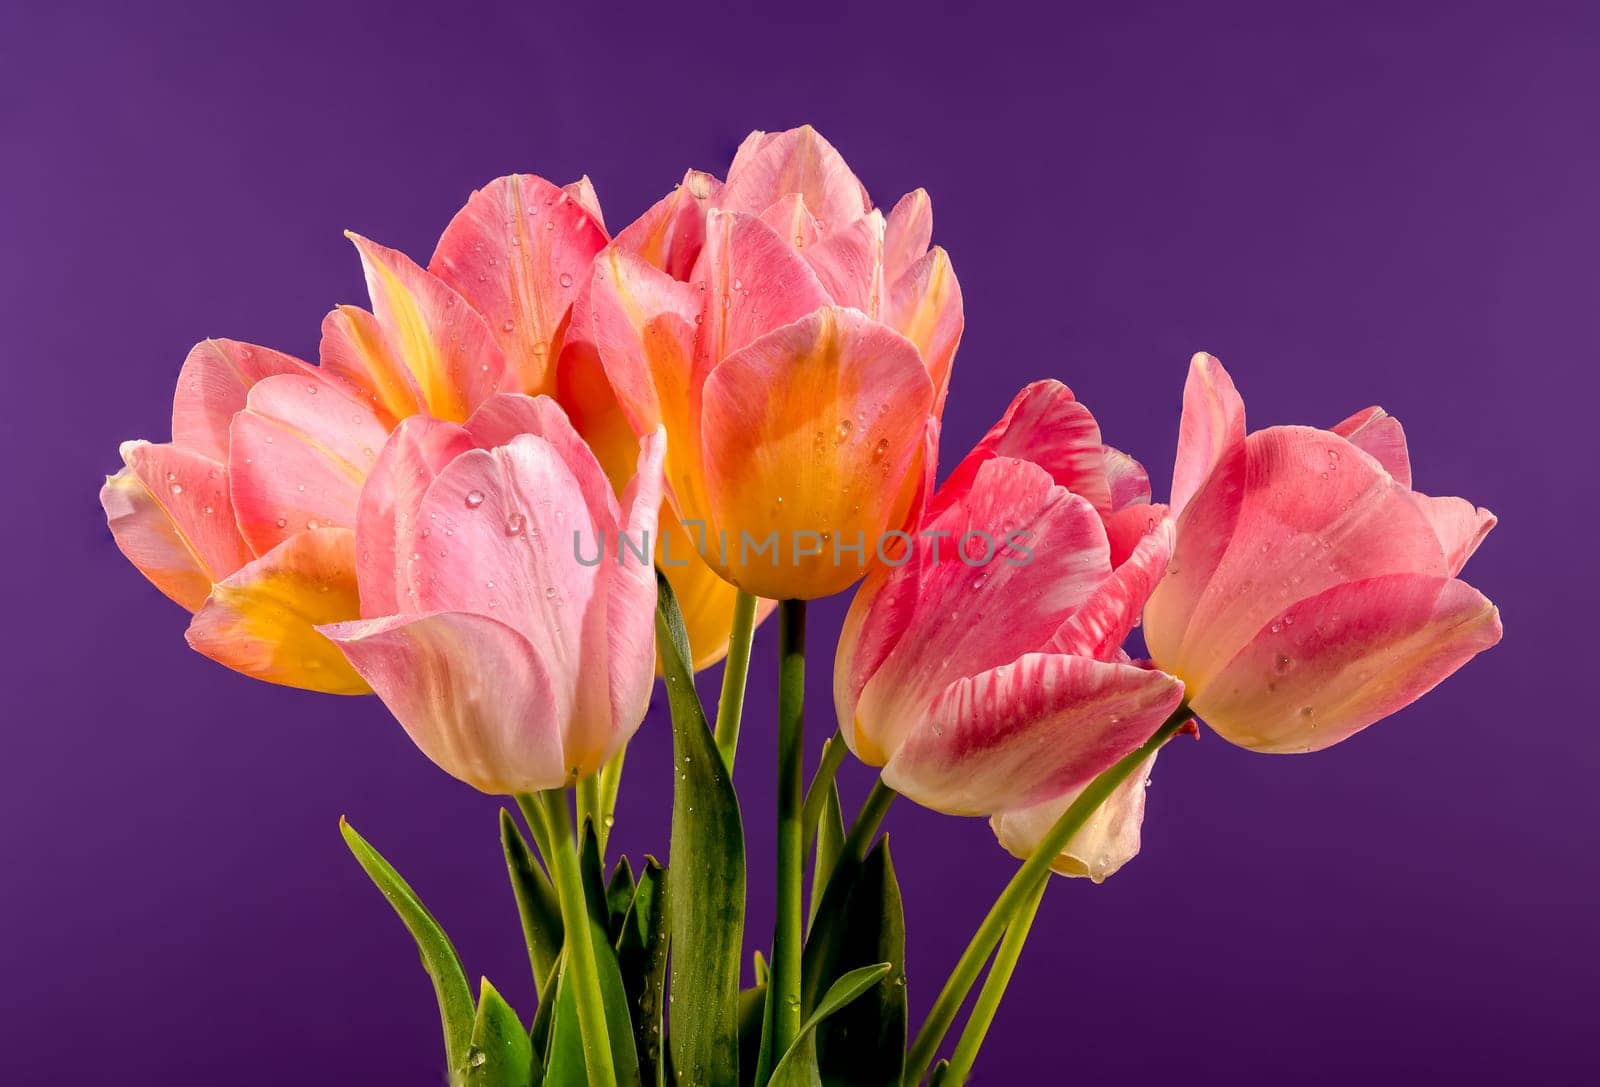 Beautiful blooming pink tulips flowers on a purple background. Flower head close-up.